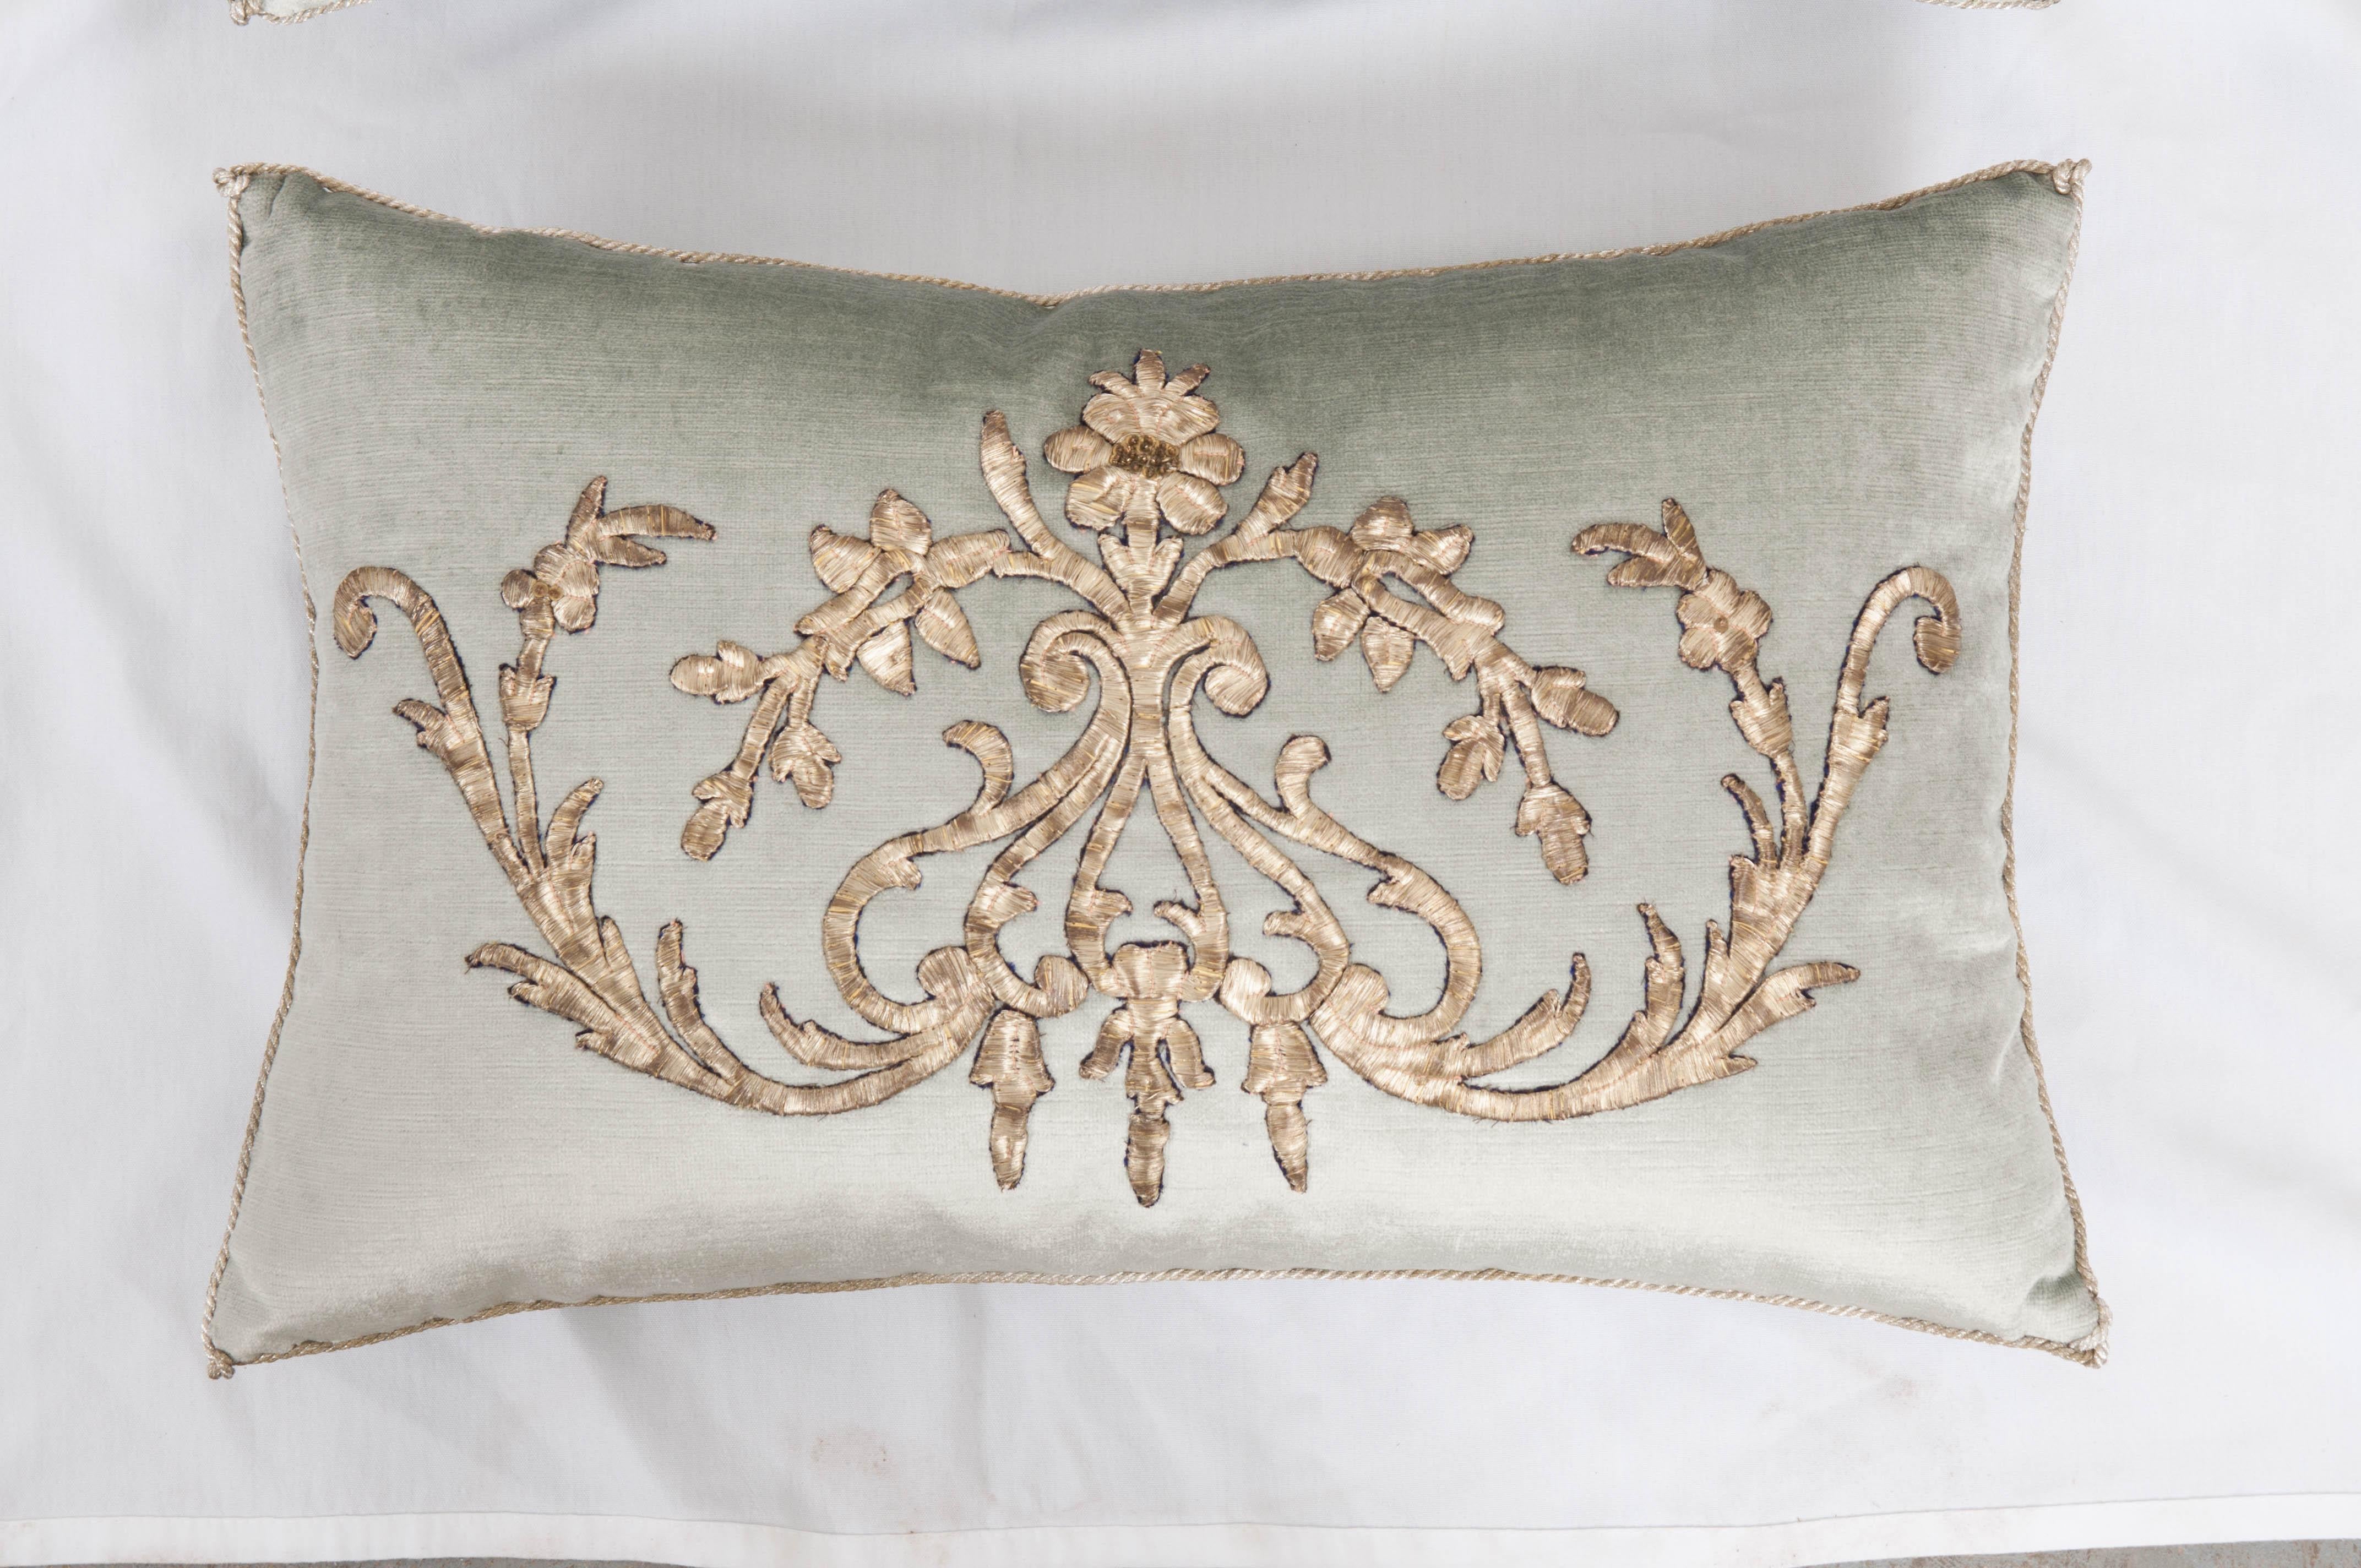 Antique Ottoman Empire raised silver metallic embroidery on pale French blue velvet. Hand-trimmed with vintage silver metallic cording which is knotted in the corners. Designed by Becky Vizard for B. Viz Designs. Note: These pillows are available